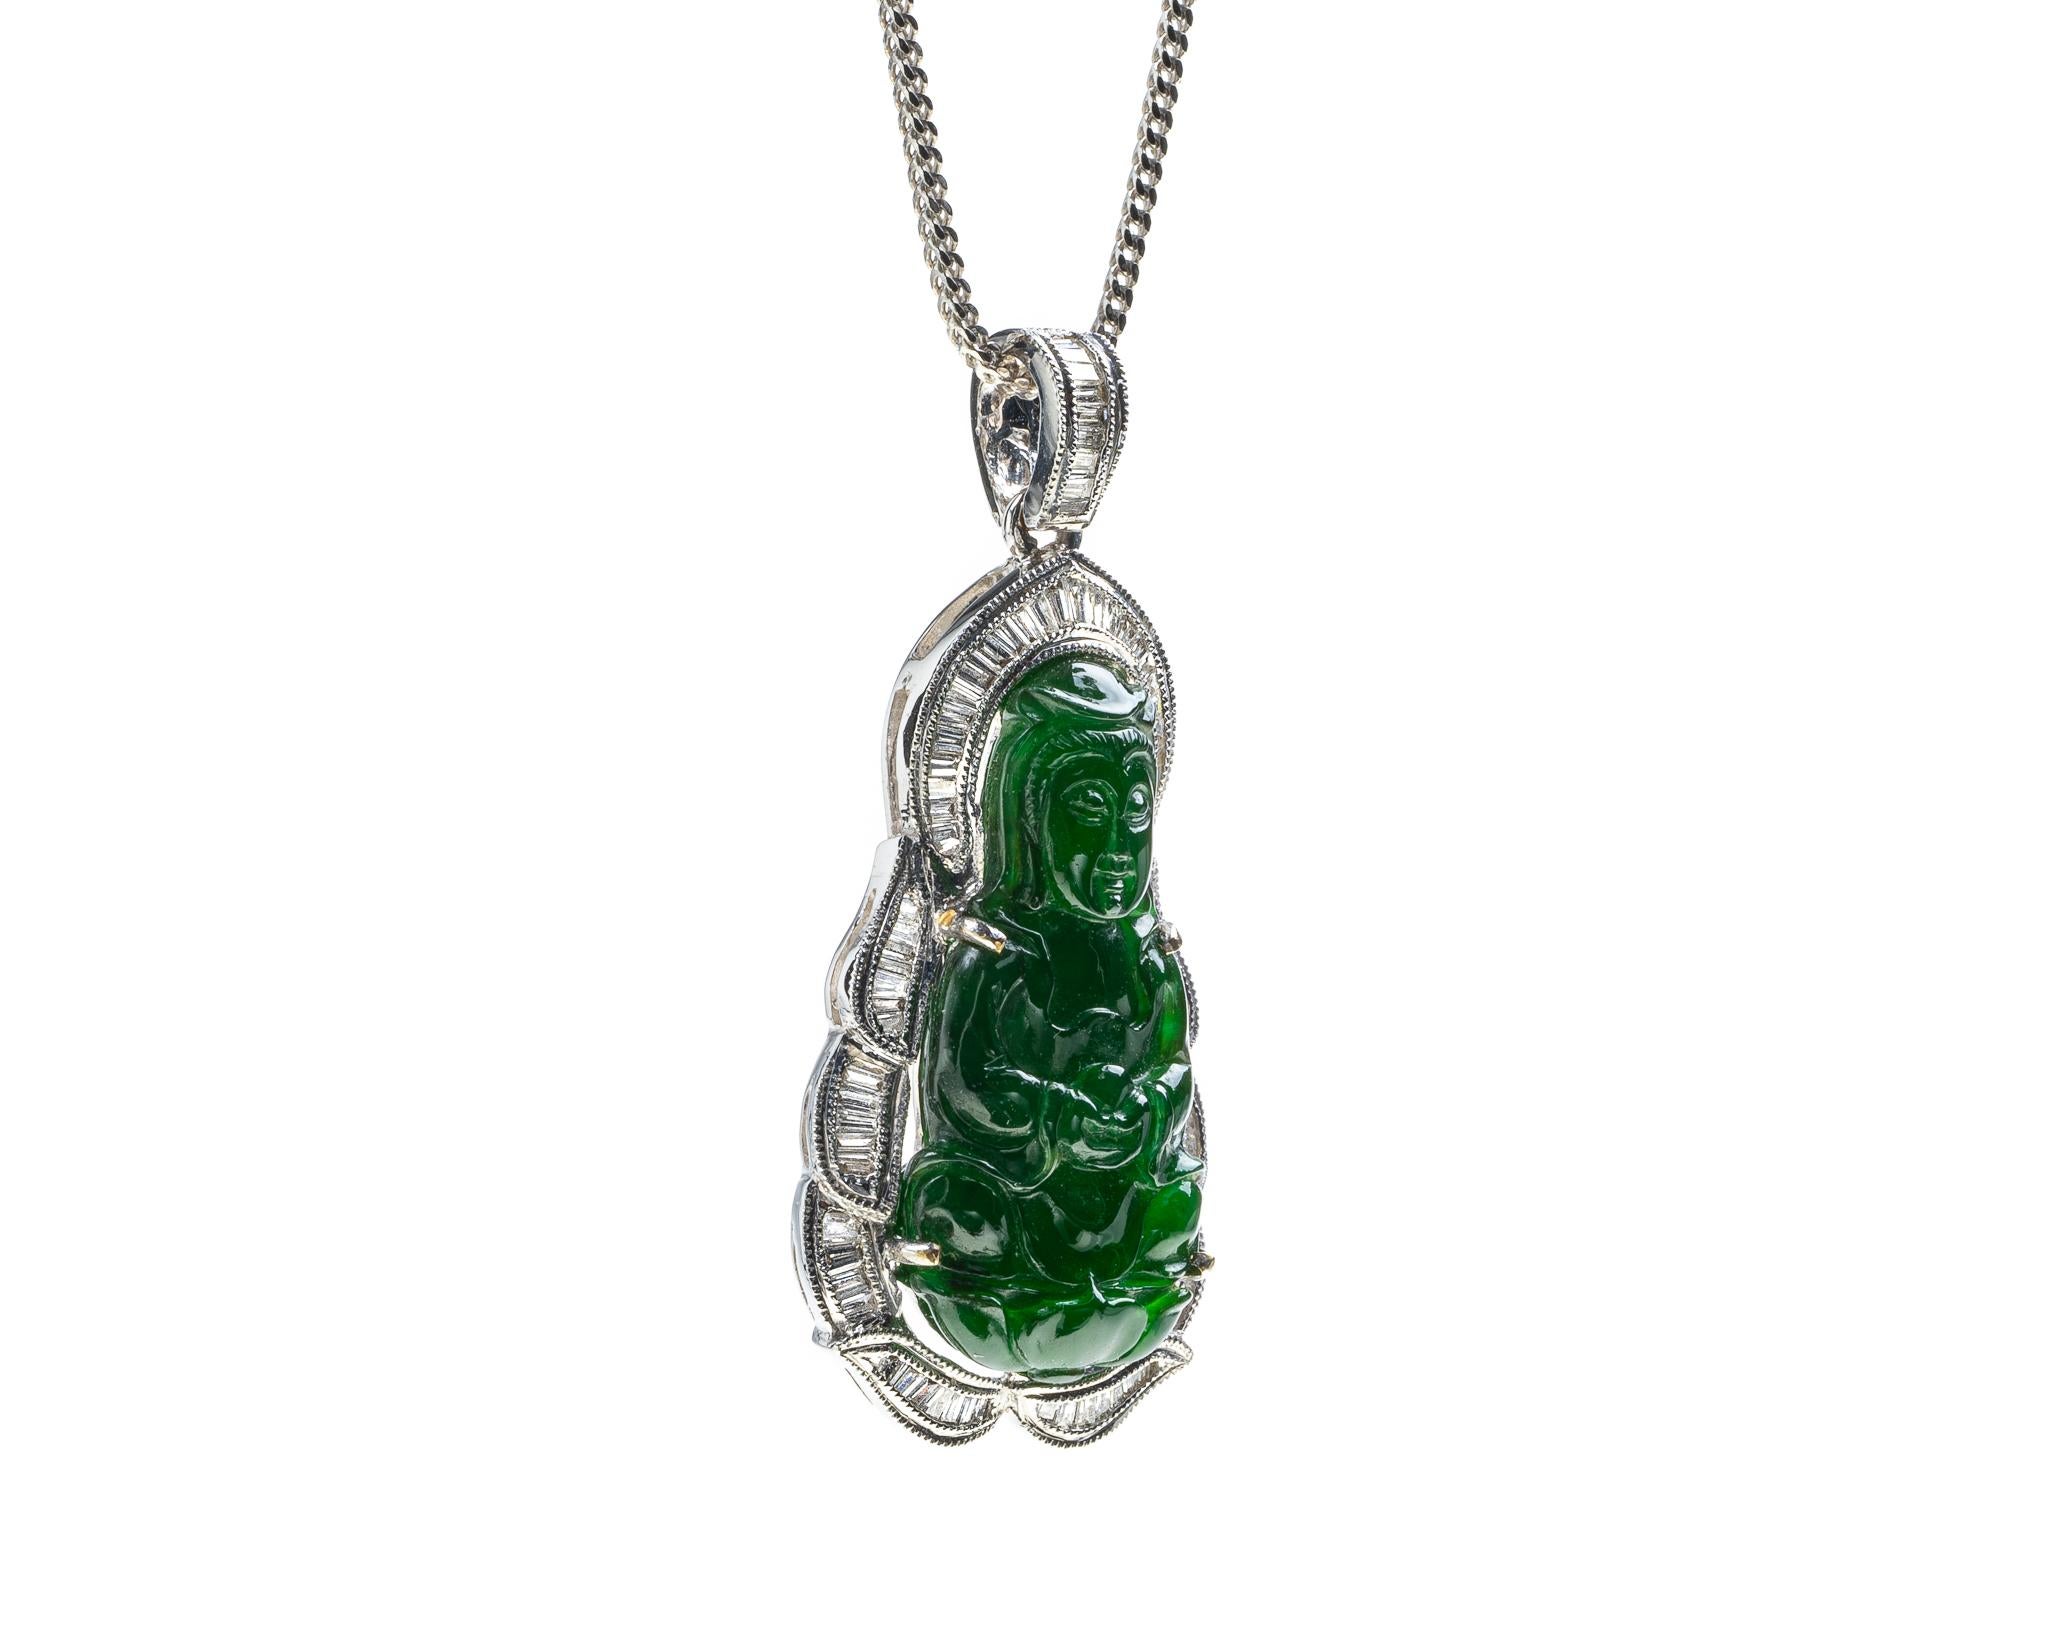 This is an all natural, untreated green jadeite jade carved Quan Yin god pendant set on an 18K white gold bail.  The carved Quan Yin god symbolizes compassion and protection. 

It measures 1.40  inches (35.6 mm) x 0.64 inches (16.5 mm) with